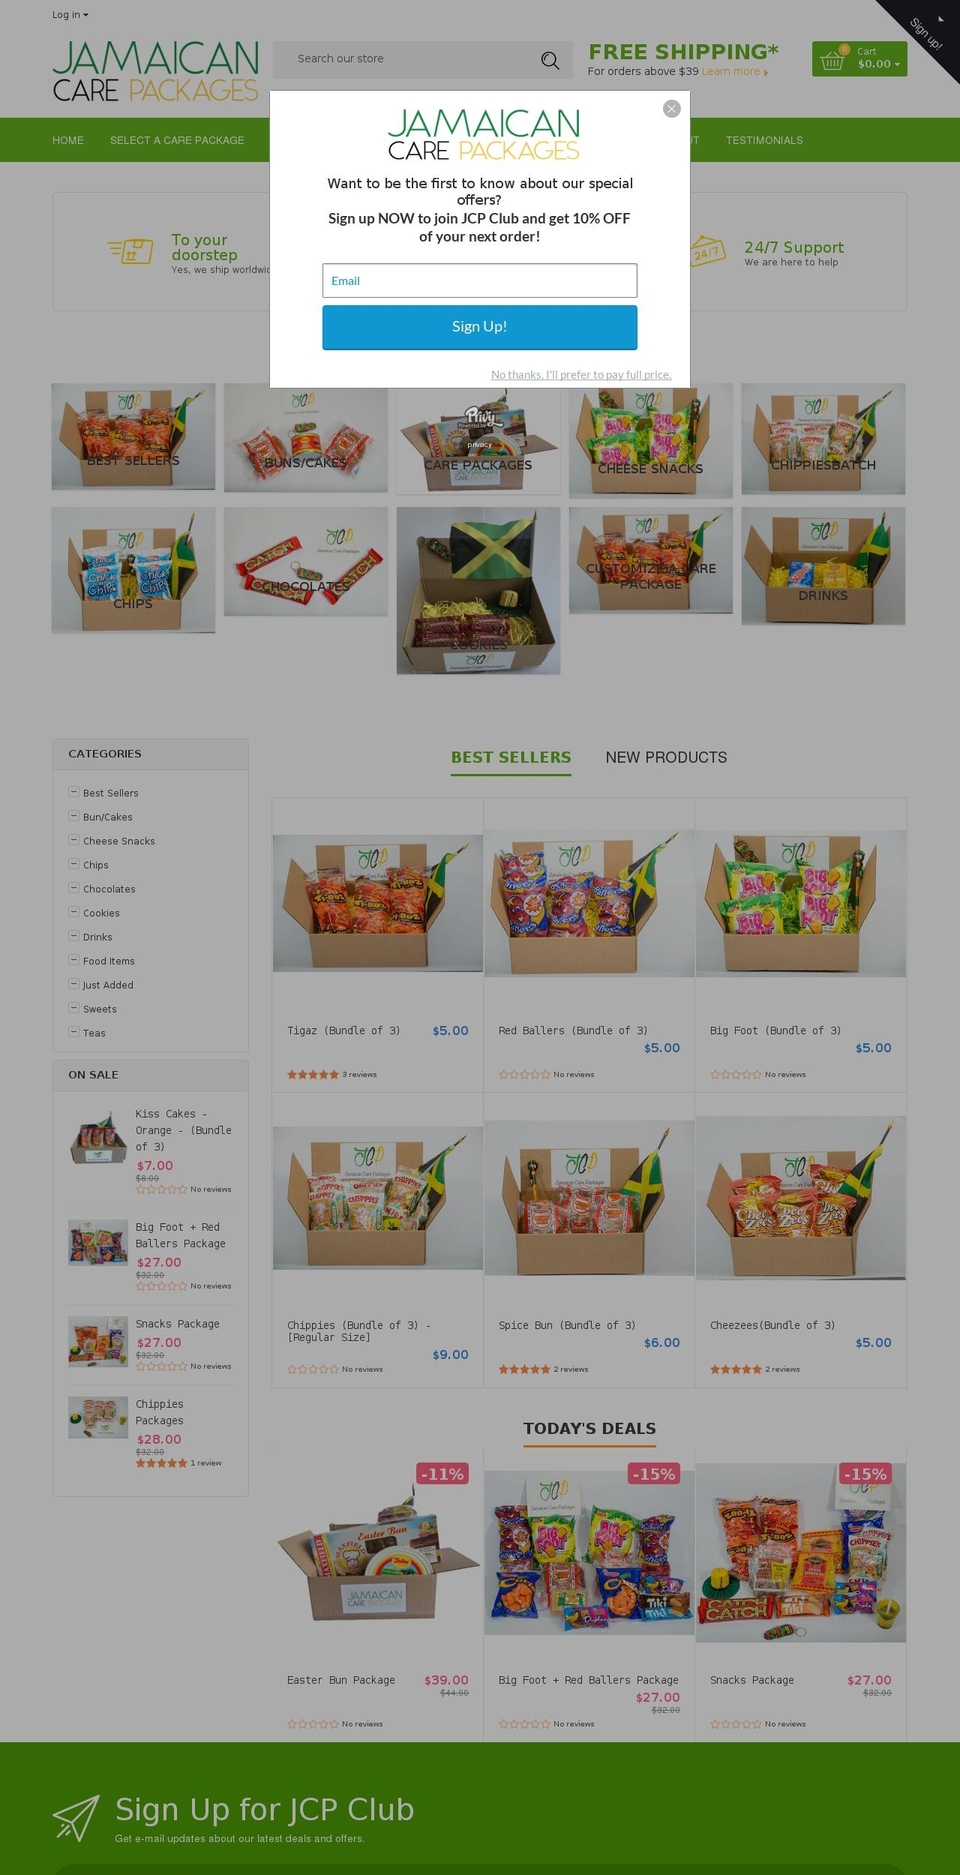 Crave Shopify theme site example jacarepackages.com